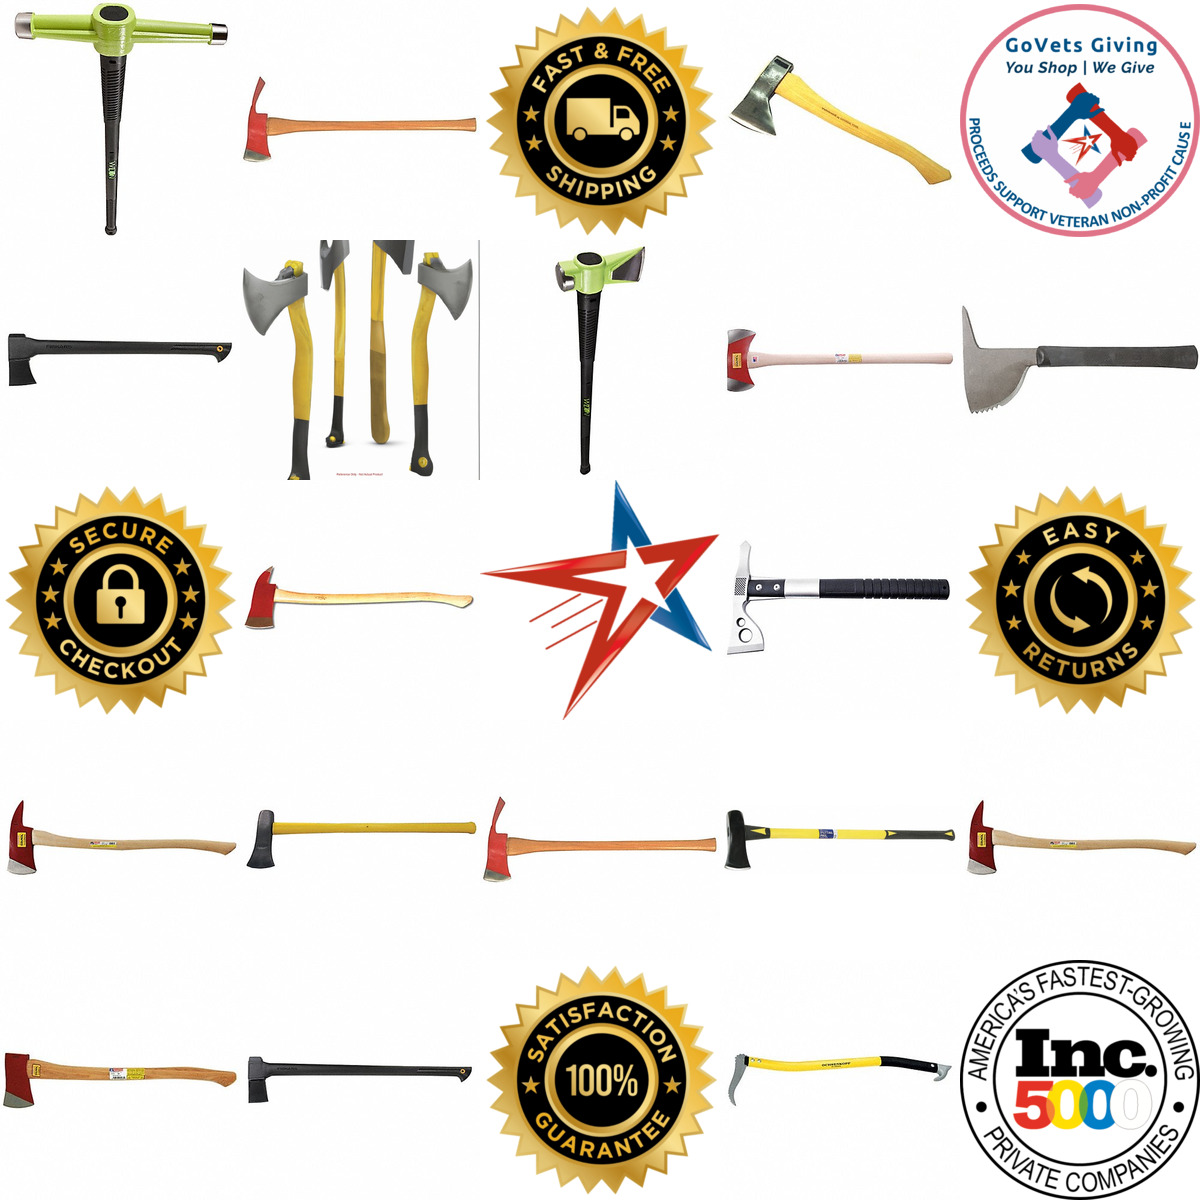 A selection of Axes Hatchets and Mauls products on GoVets